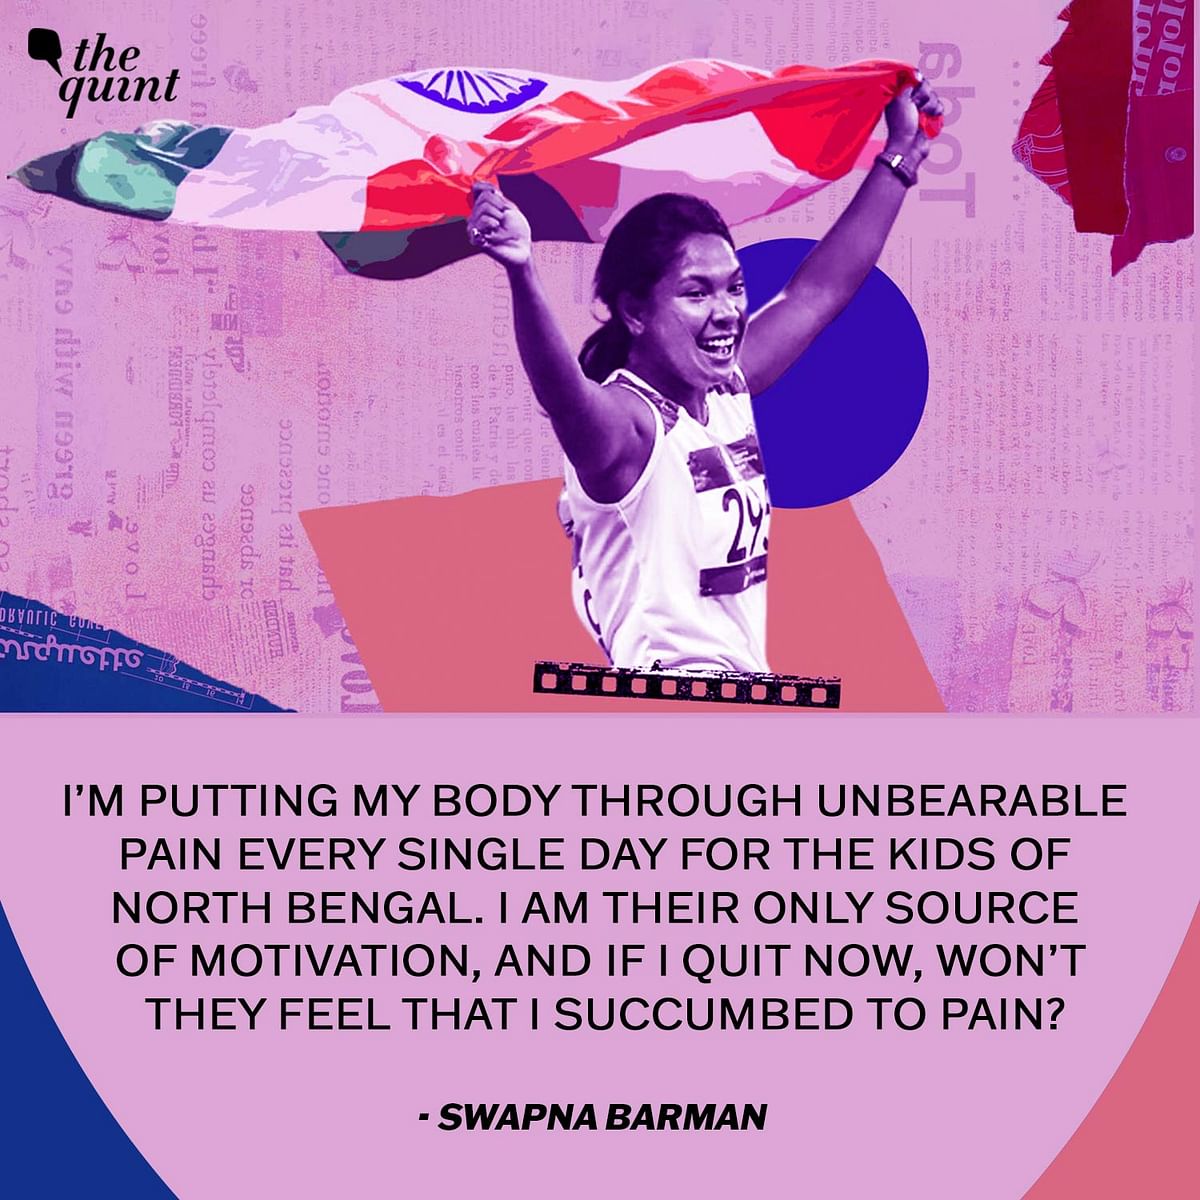 "Hangzhou Asian Games will be my last international competition. I'll compete accordingly," says Swapna Barman.